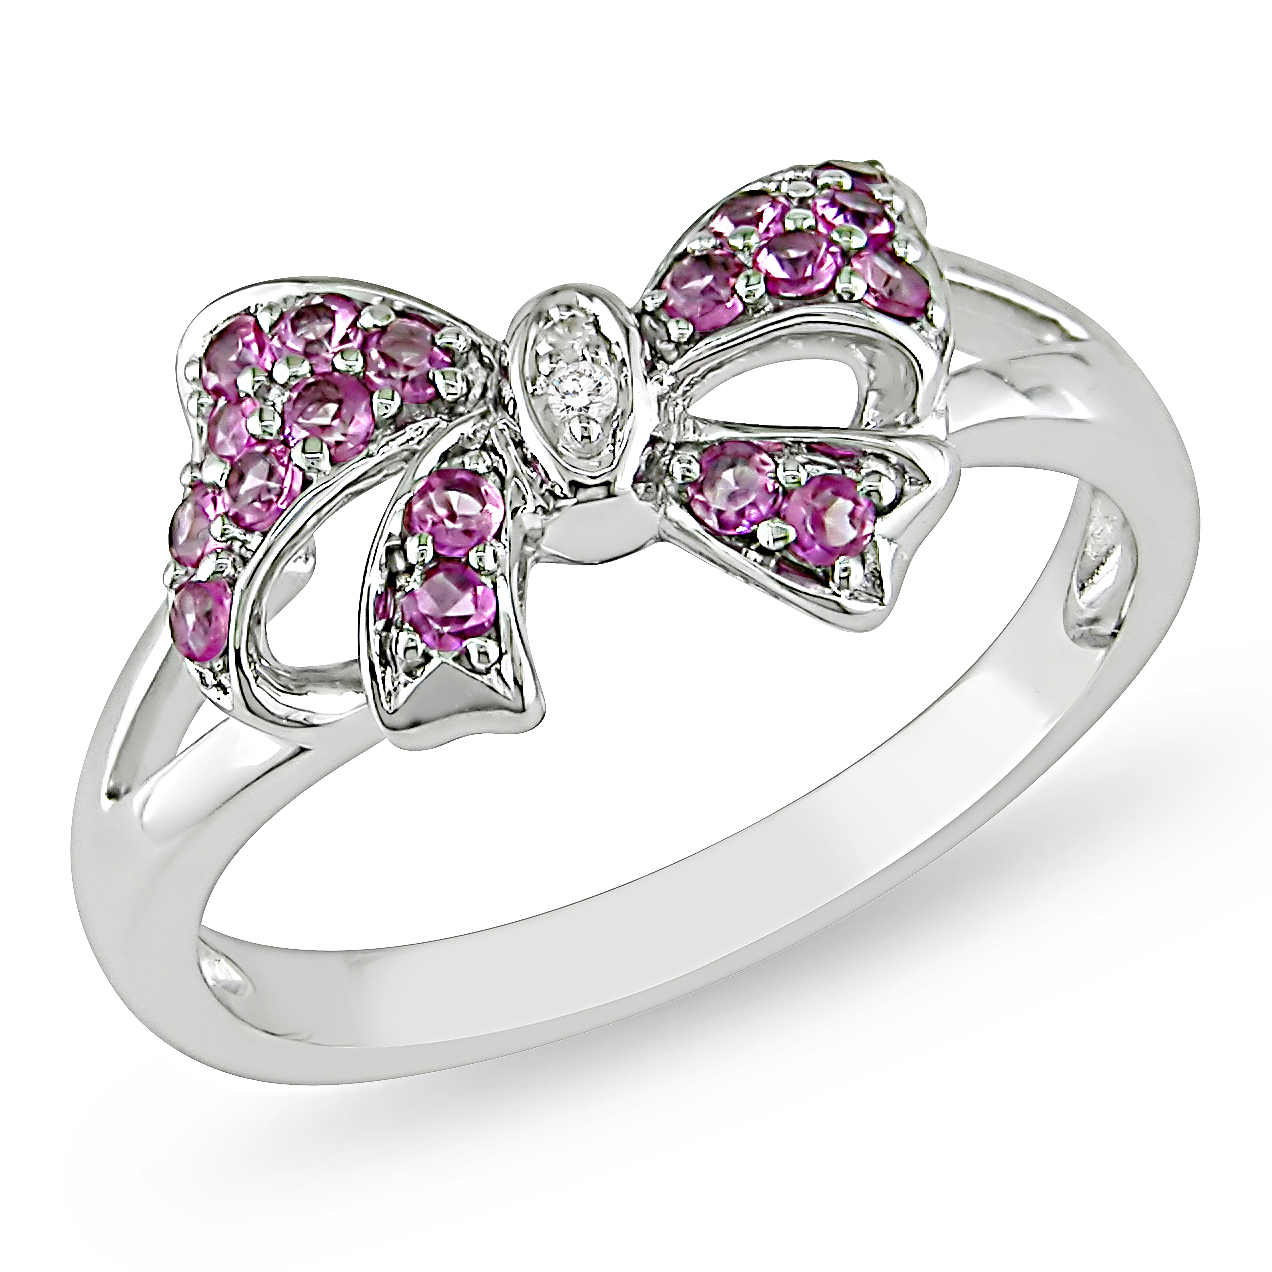 Amour 0.01 Carat T.W. Diamond and 1/3 Carat T.G.W. Created Pink Sapphire Fashion Ring in Sterling Silver GH I2;I3